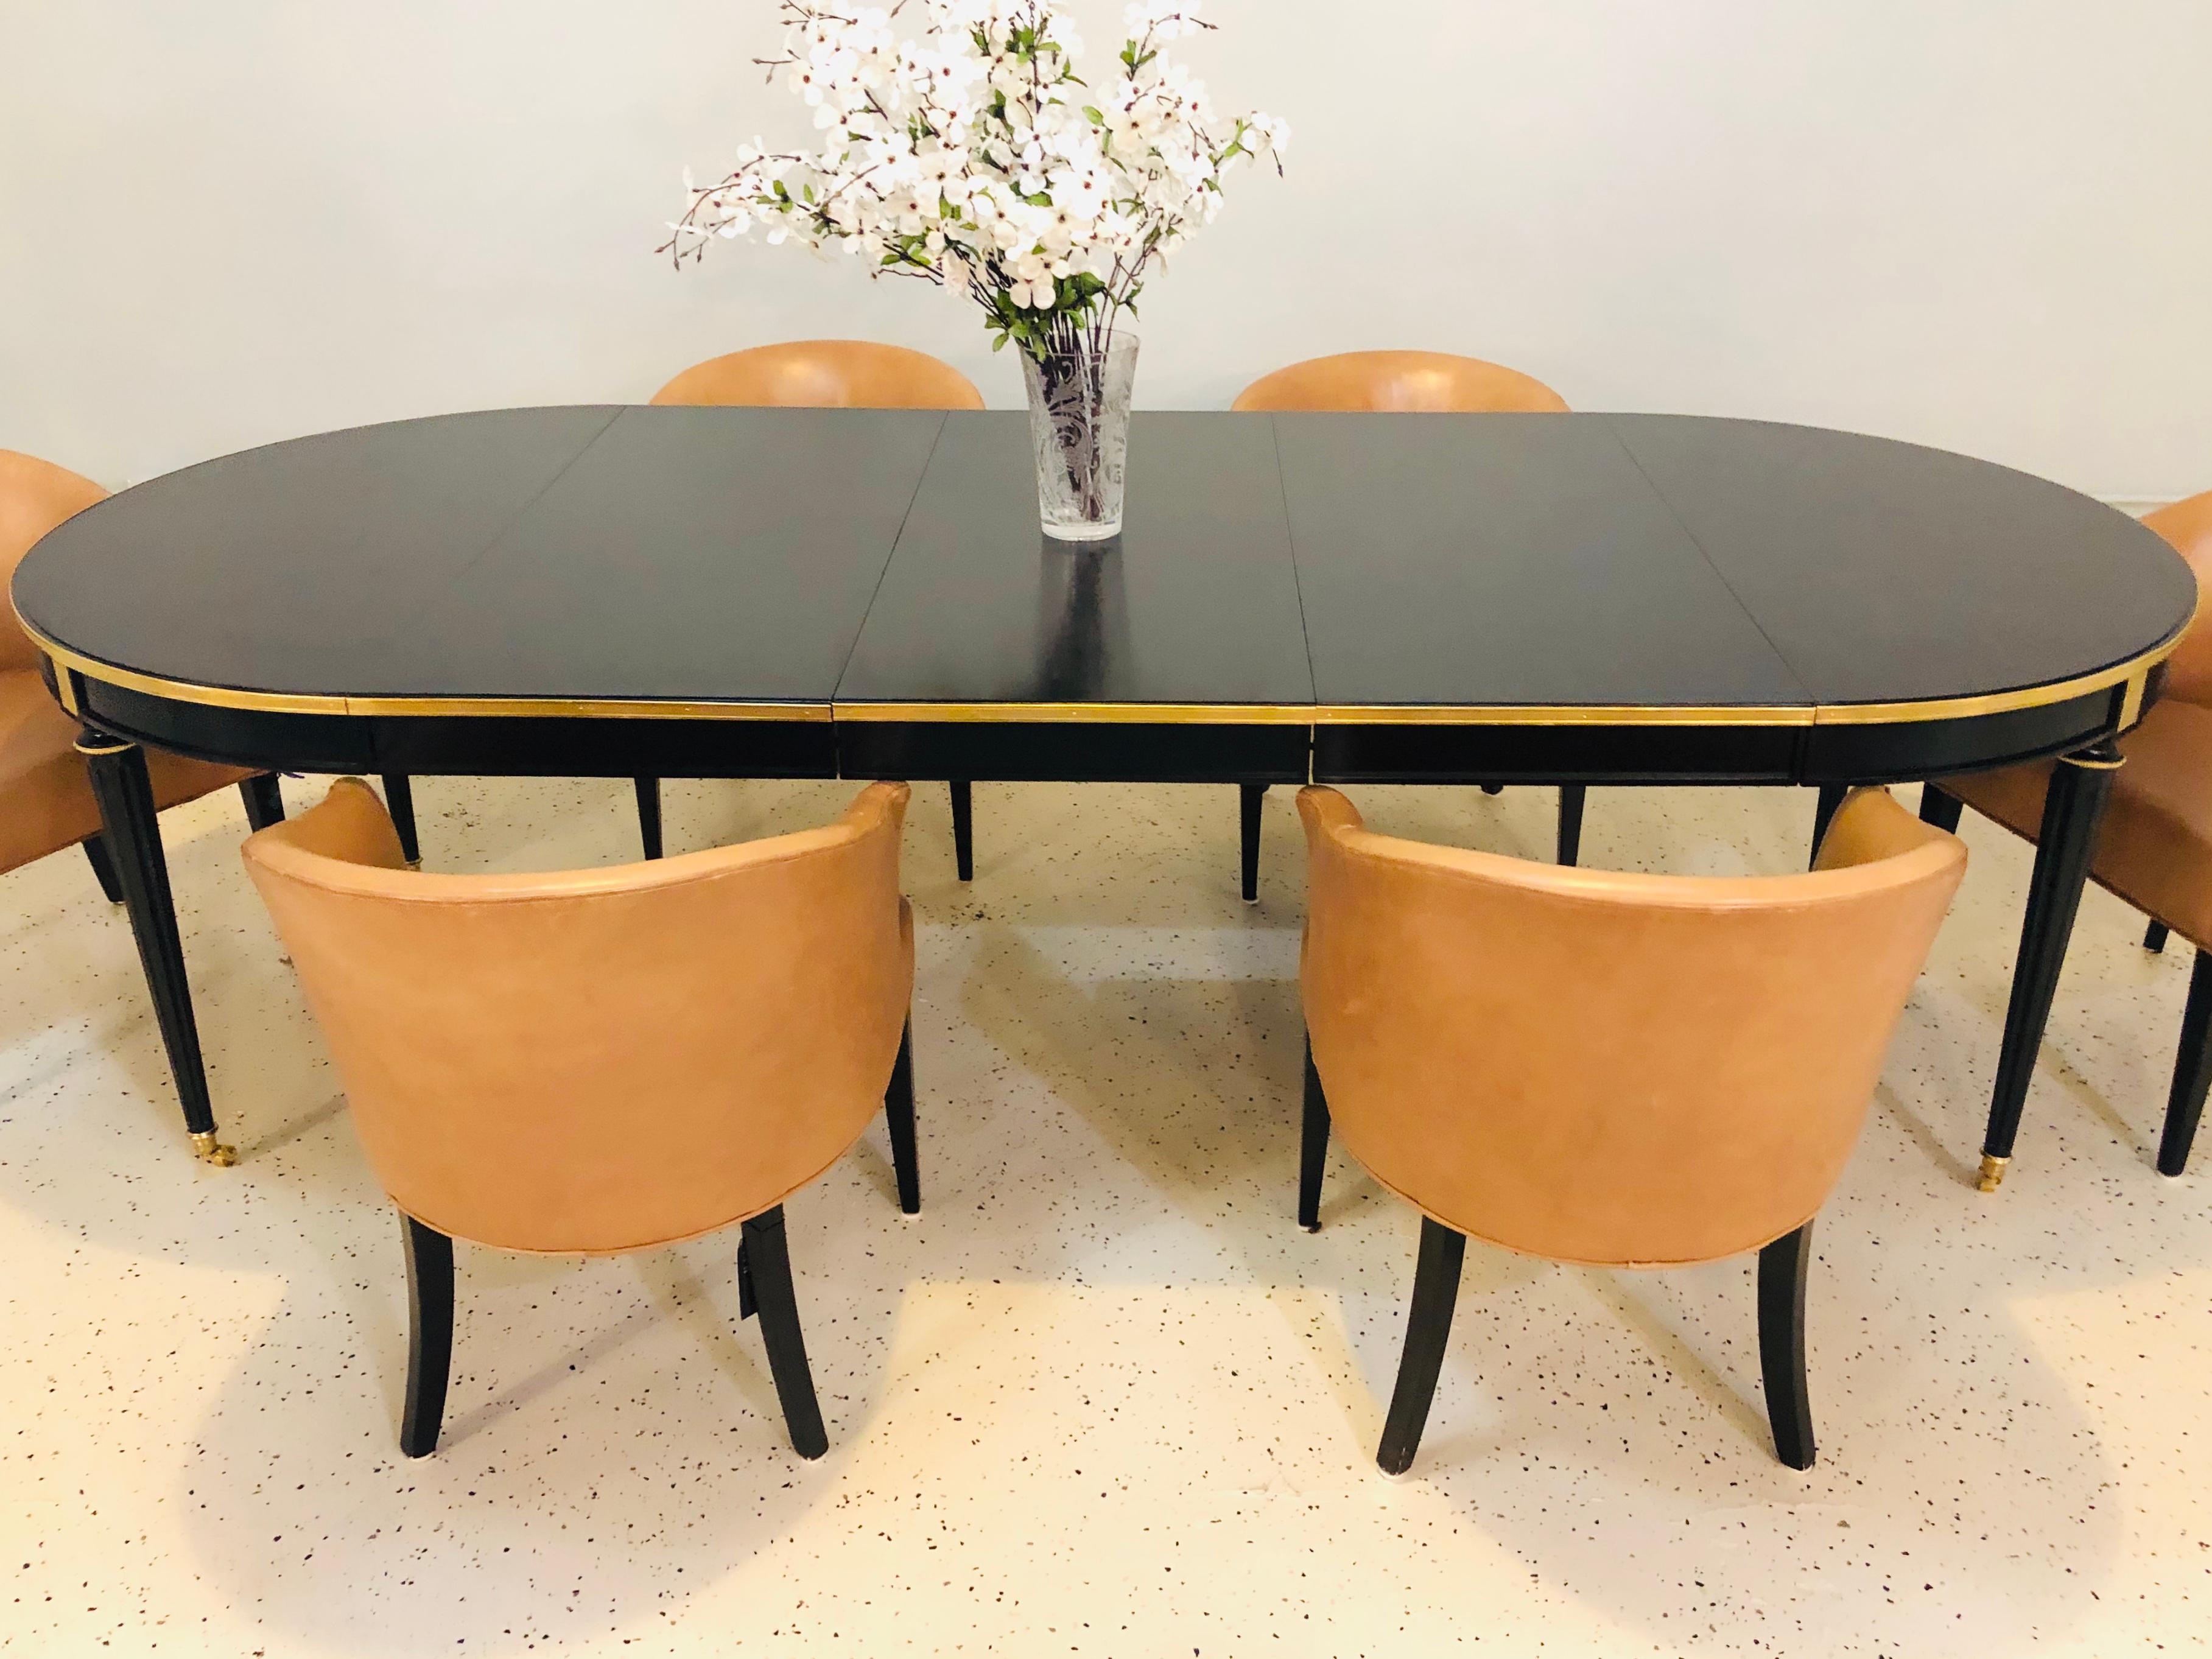 Six Edward Wormley dining chairs. Mid-Century Modern leather upholstered dark stained wood dining chairs. Five linen chair covers are included. Can purchase as many as are needed. Price is for the set. Five having a nice custom linen slip cover in